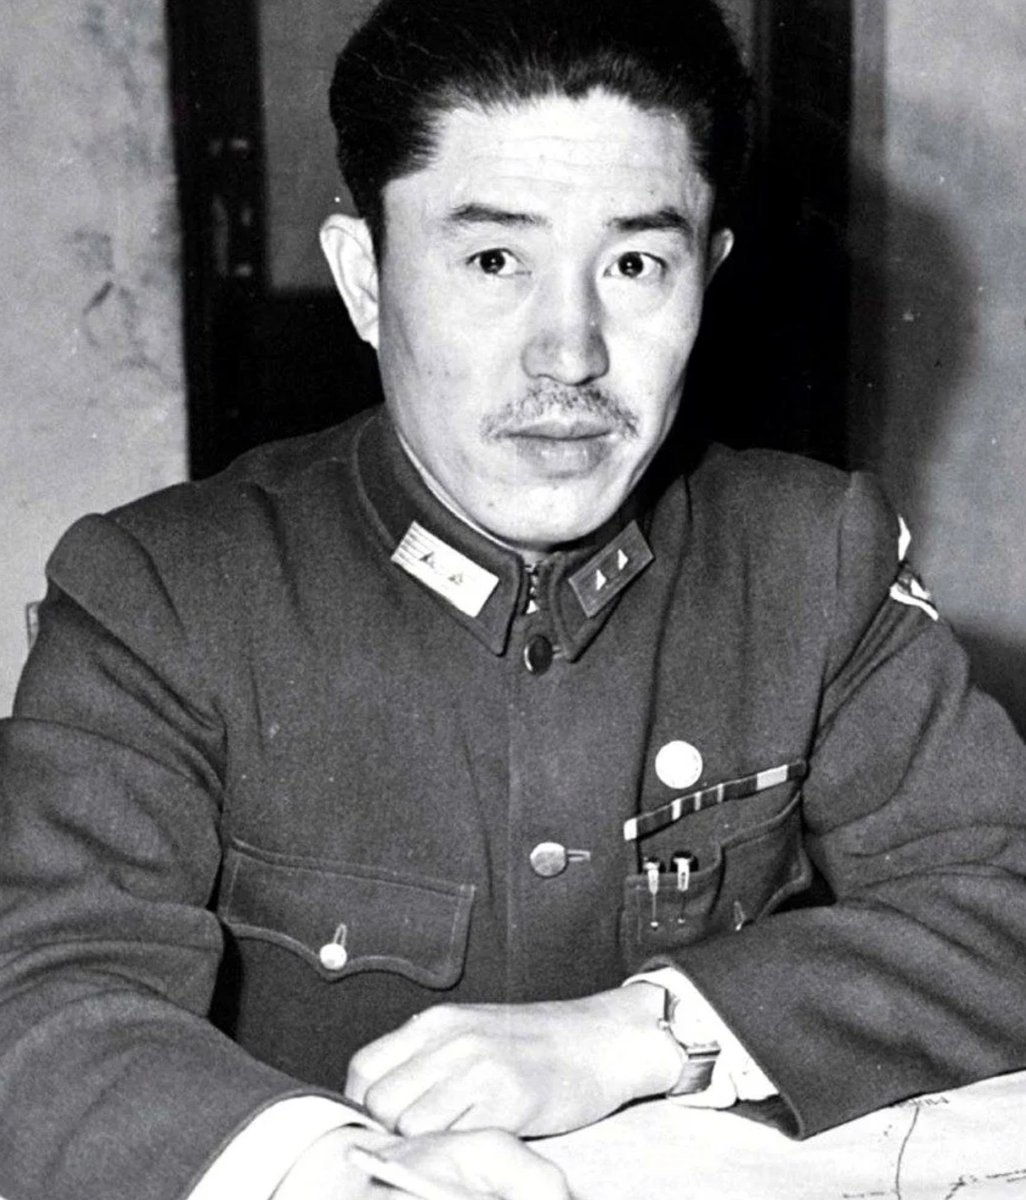 31) General Zeng Zesheng, commander of 60th Army, nominally belonging to Republic of China Army, but in reality of Yunnanese warlord Dian Army origin. His defection ended the Siege of Changchun, the greatest humanitarian tragedy of the Chinese Civil War. https://twitter.com/simonbchen/status/1308624233111584769?s=20